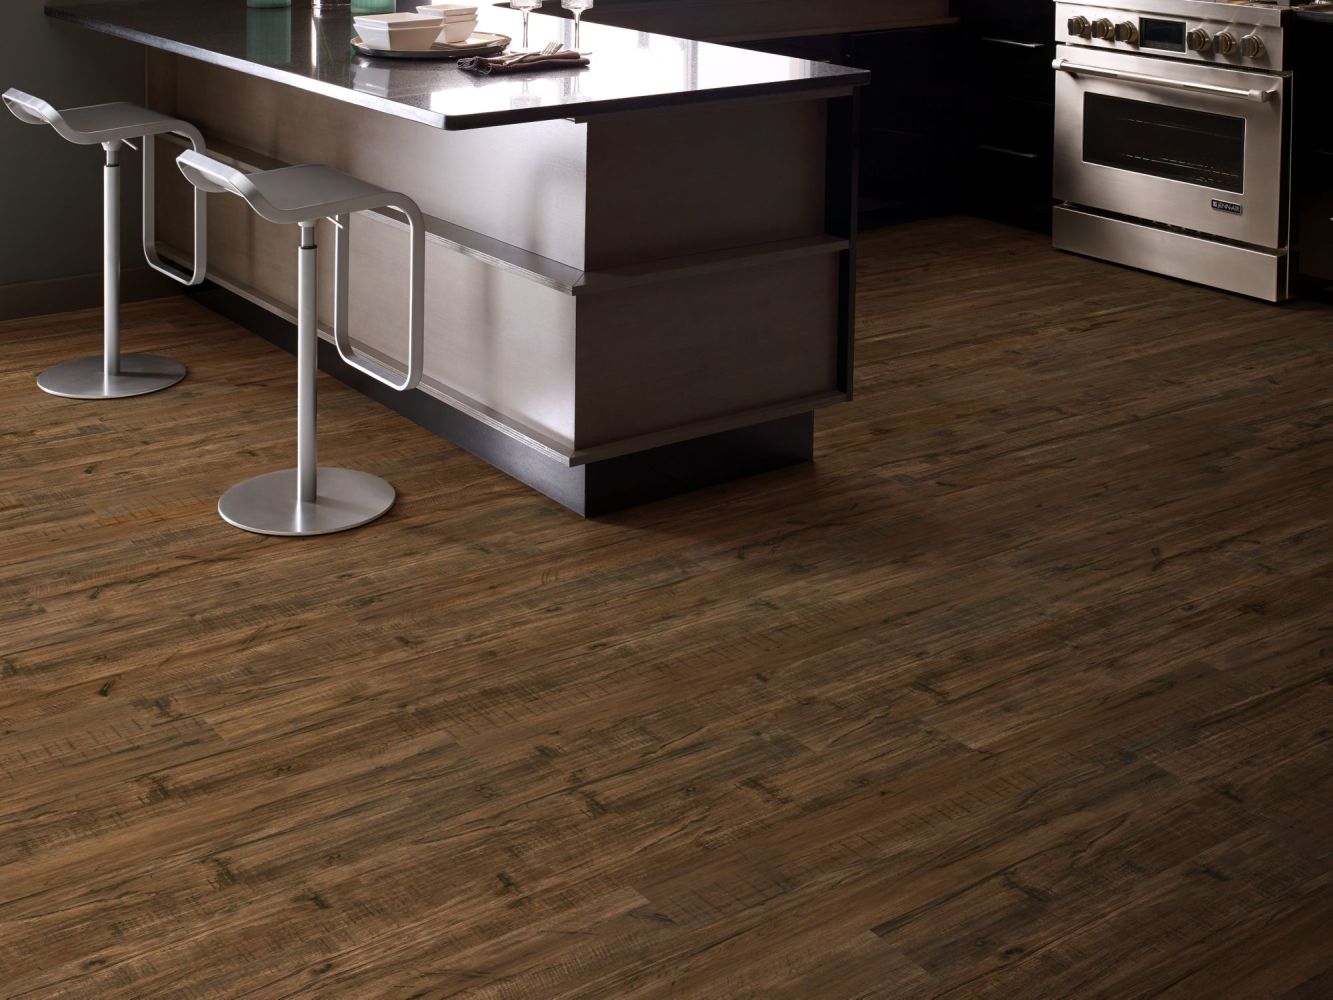 Shaw Floors Dr Horton Cosmo Plank Parma 00734_DR001